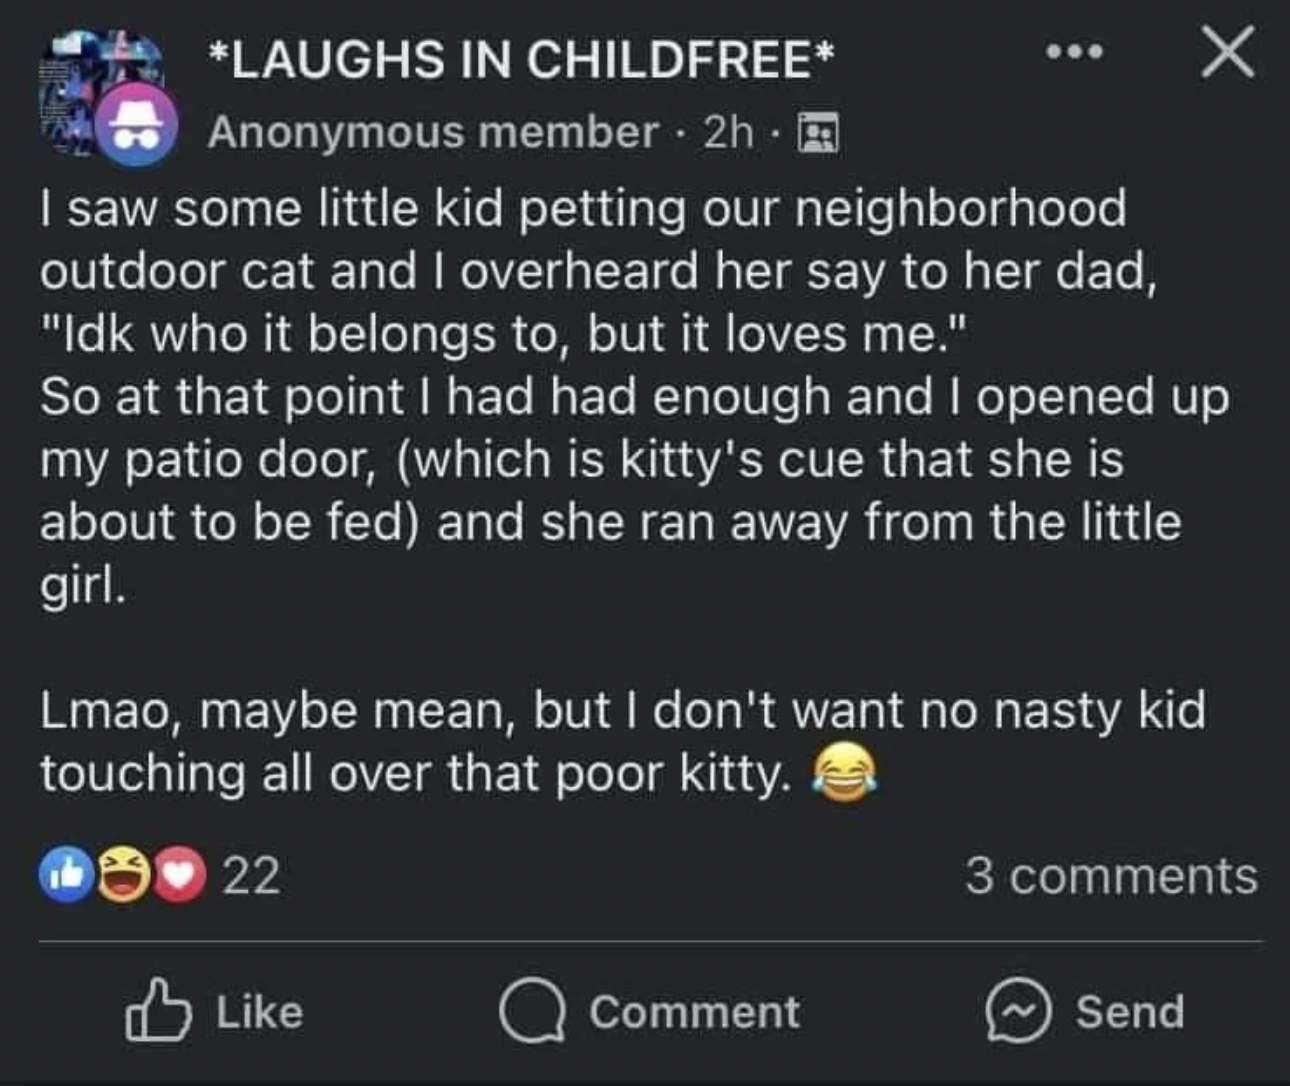 screenshot - Laughs In Childfree Anonymous member 2h I saw some little kid petting our neighborhood outdoor cat and I overheard her say to her dad, "Idk who it belongs to, but it loves me." . So at that point I had had enough and I opened up my patio door